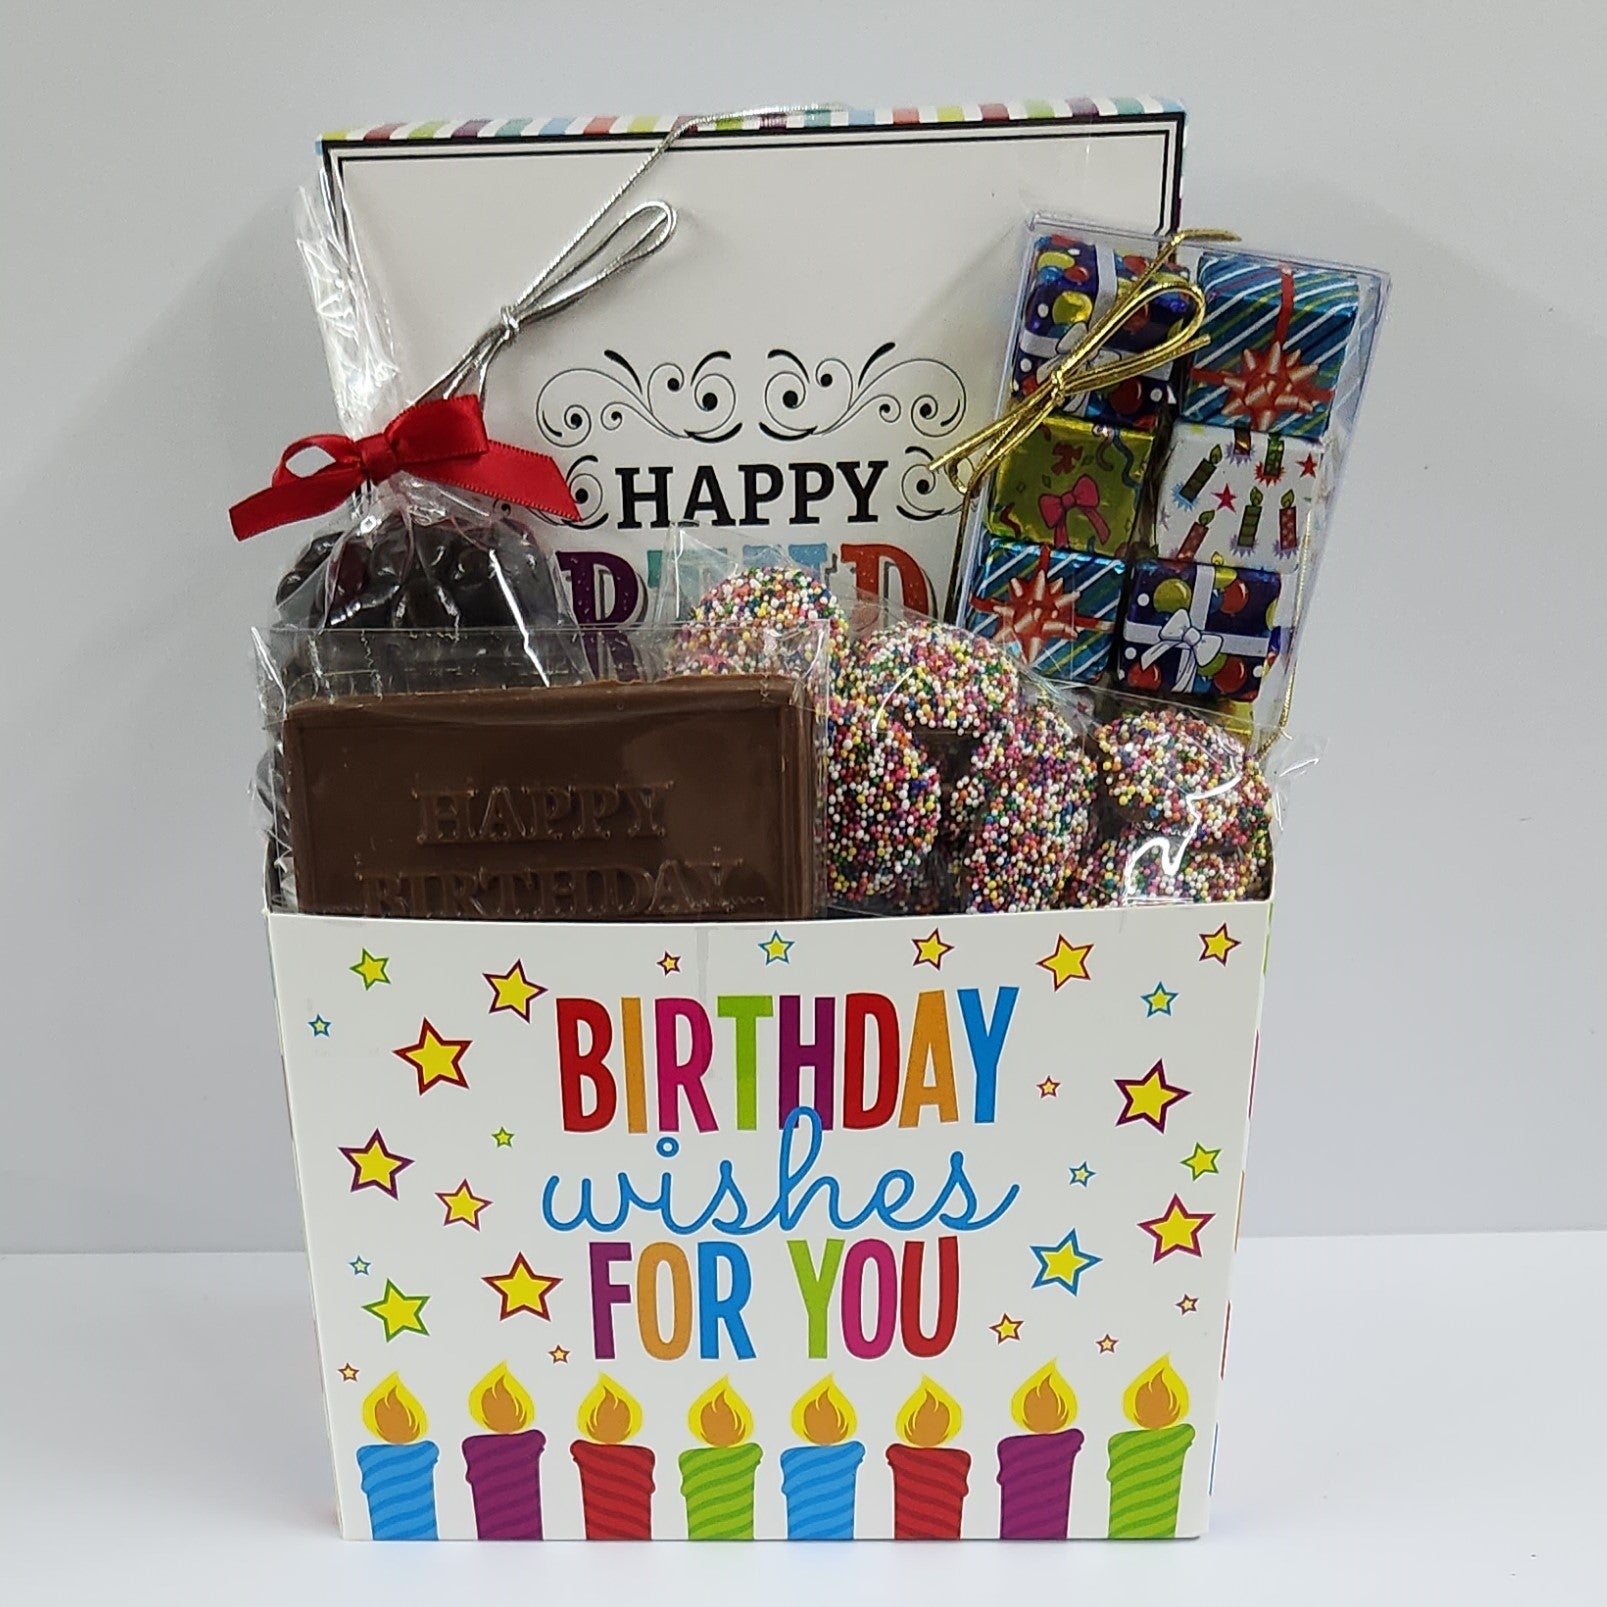 Personalized Chocolate Gift Box for Birthday | Winni.in